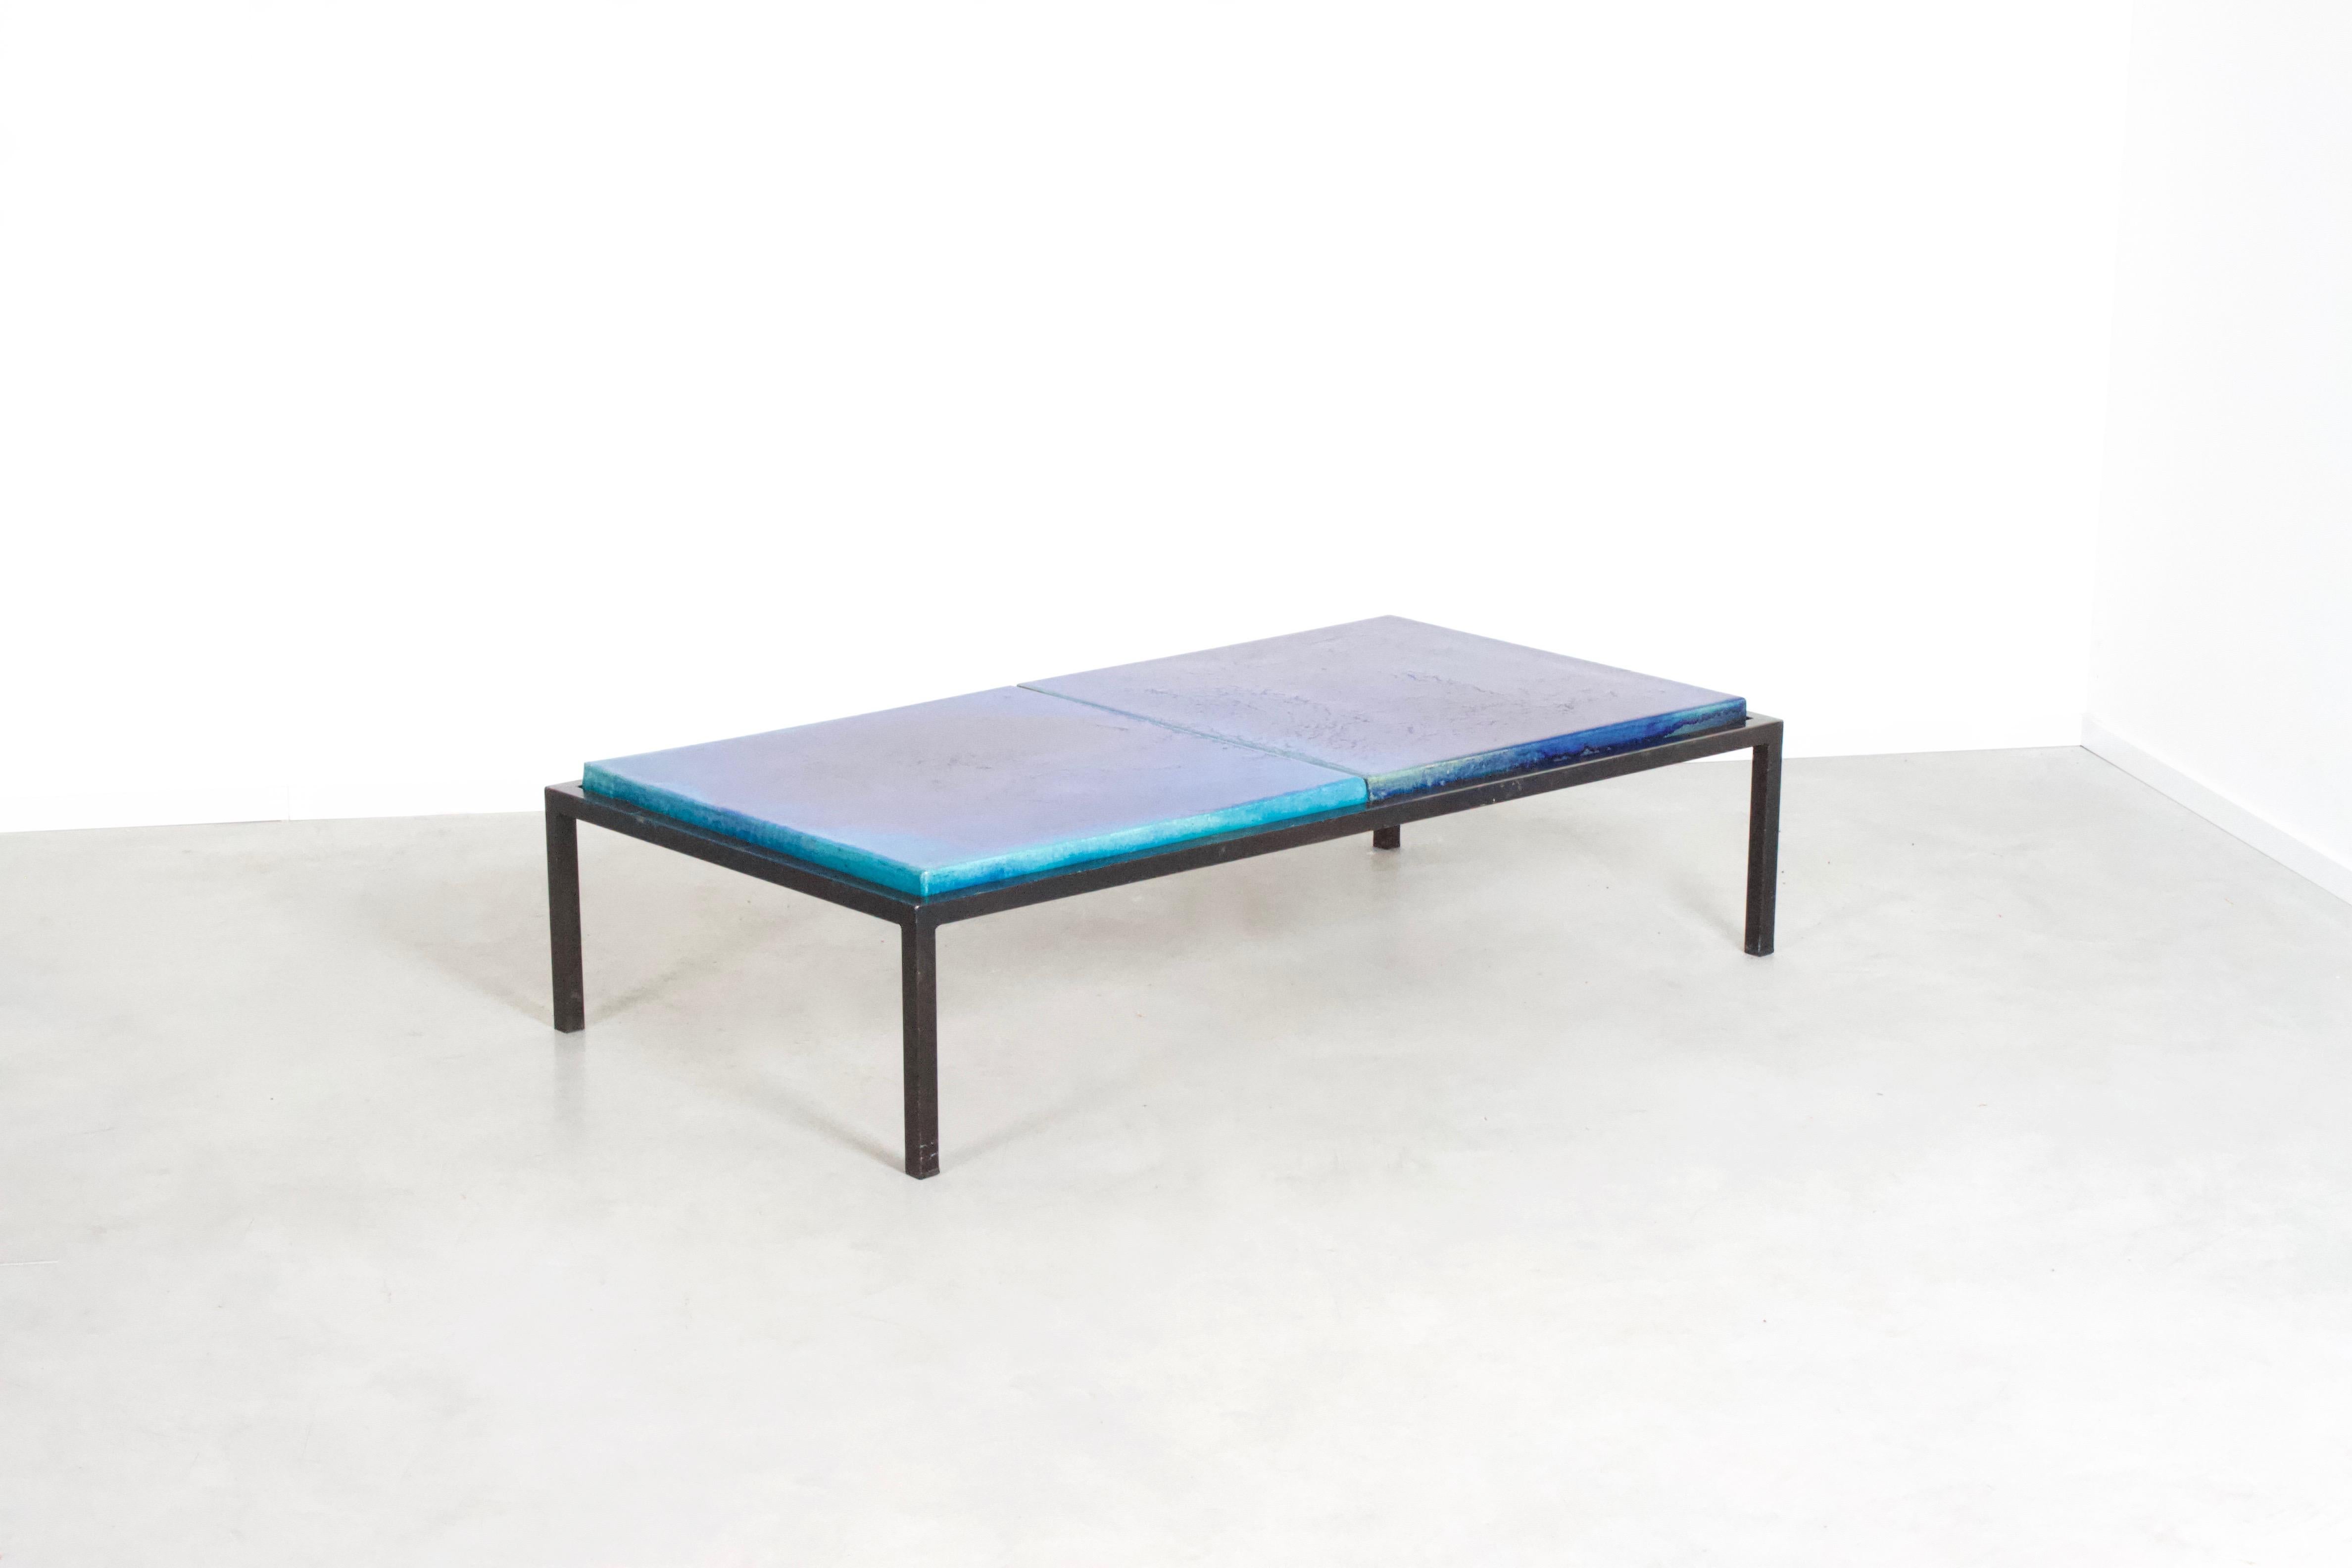 Rare tile coffee table by Majolika in very good condition.

This table consists of a black metal frame which is left in original condition. (can be professionally resprayed on request)

The frame holds two beautiful ceramic azure and blue